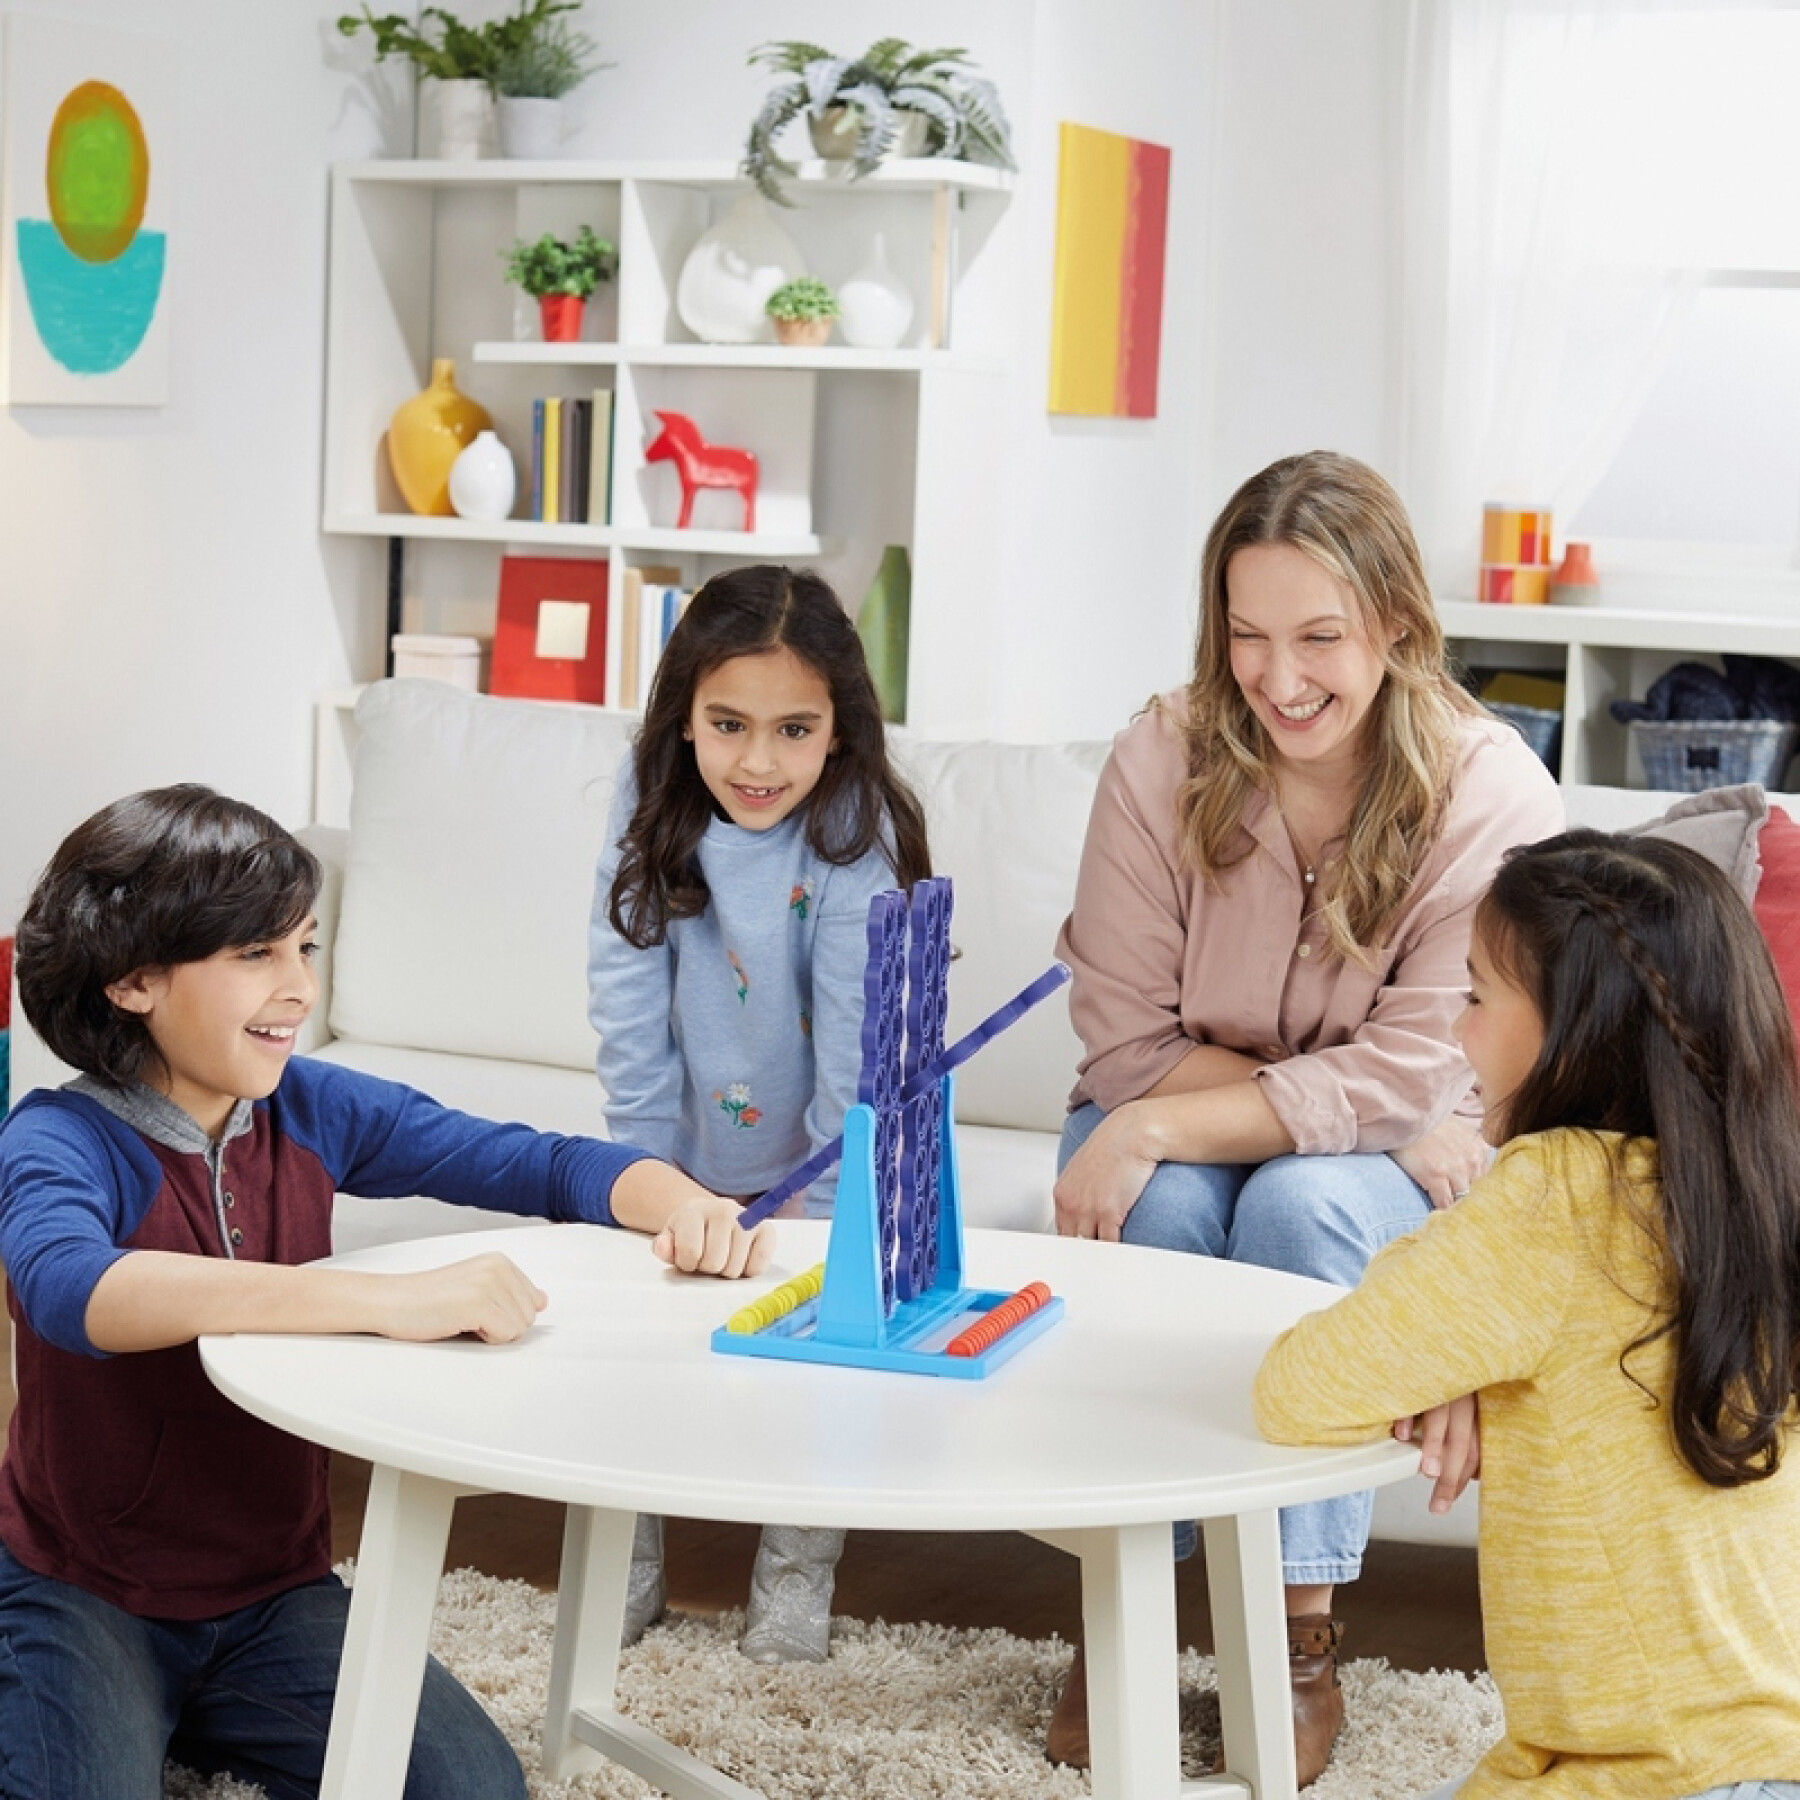 Board games to the power of 4 spin Hasbro France France